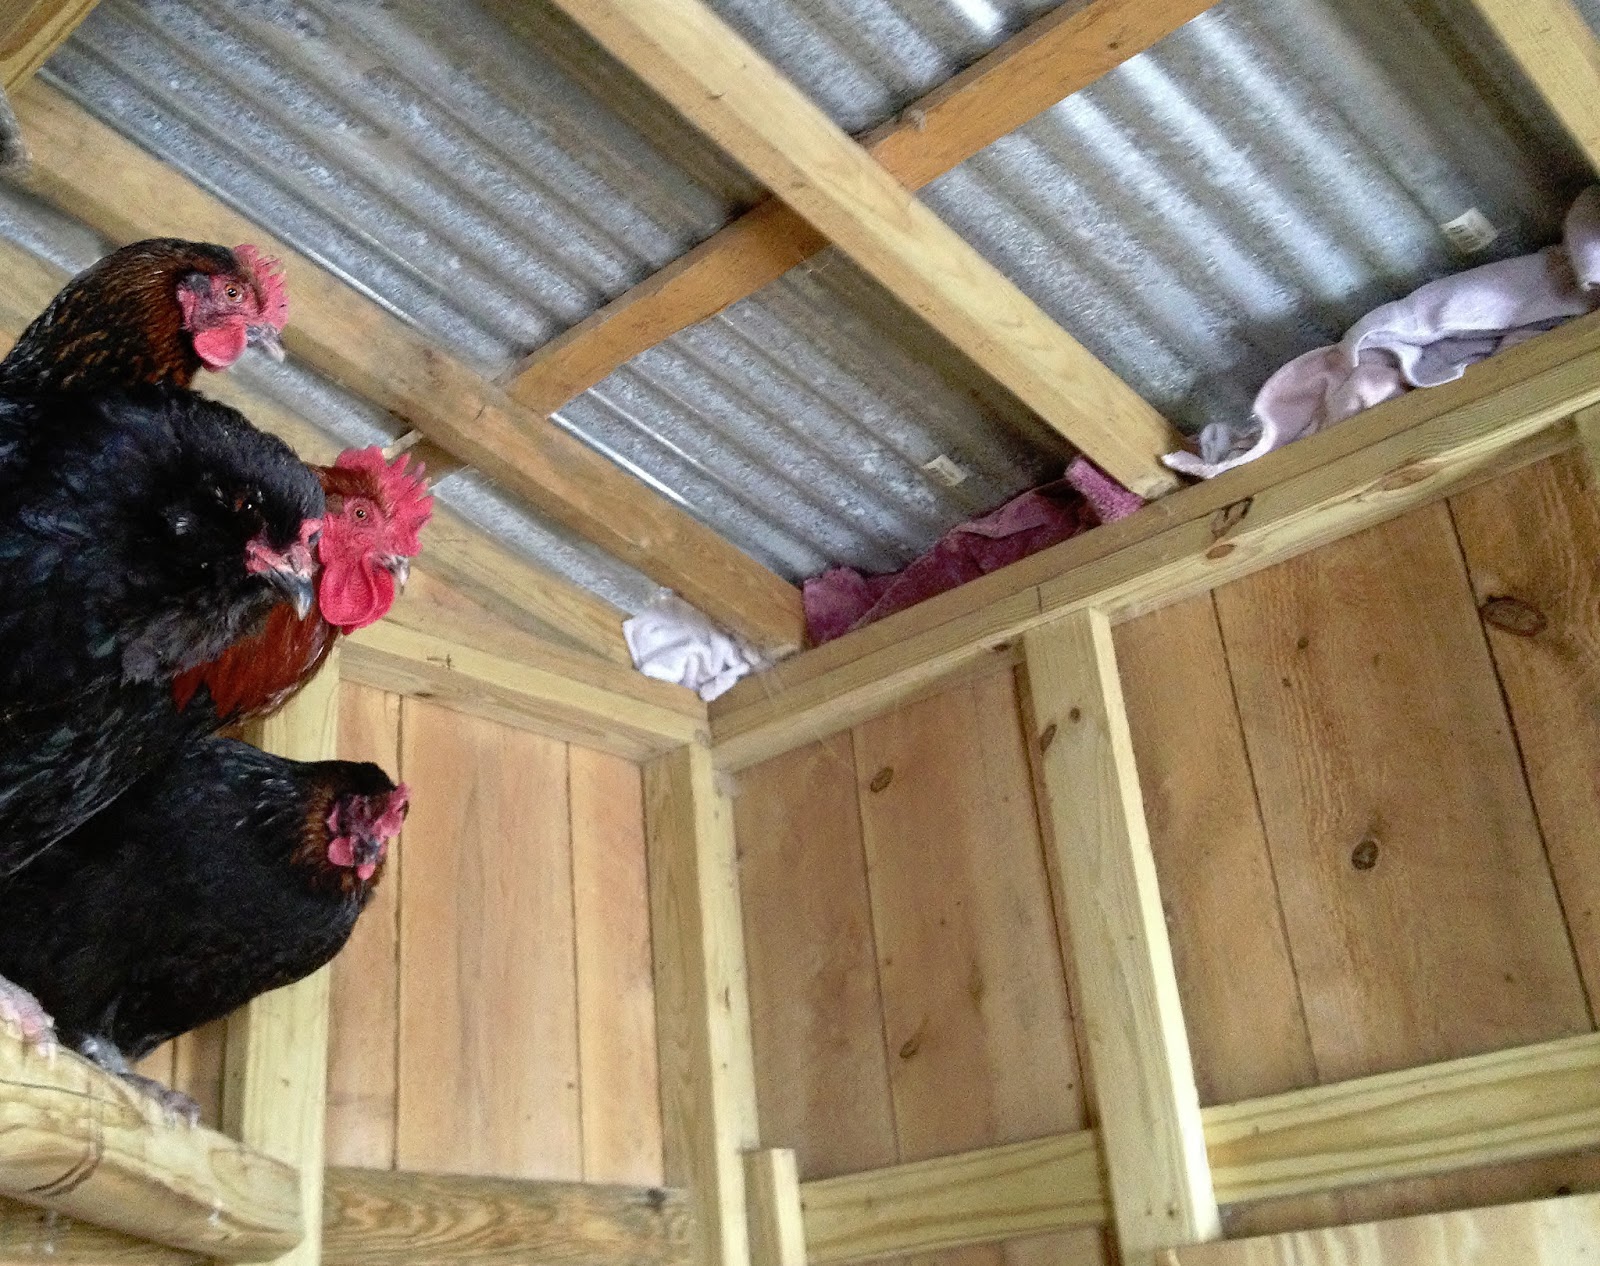 Blocking drafts in the chicken coop (just for winter) - Murano